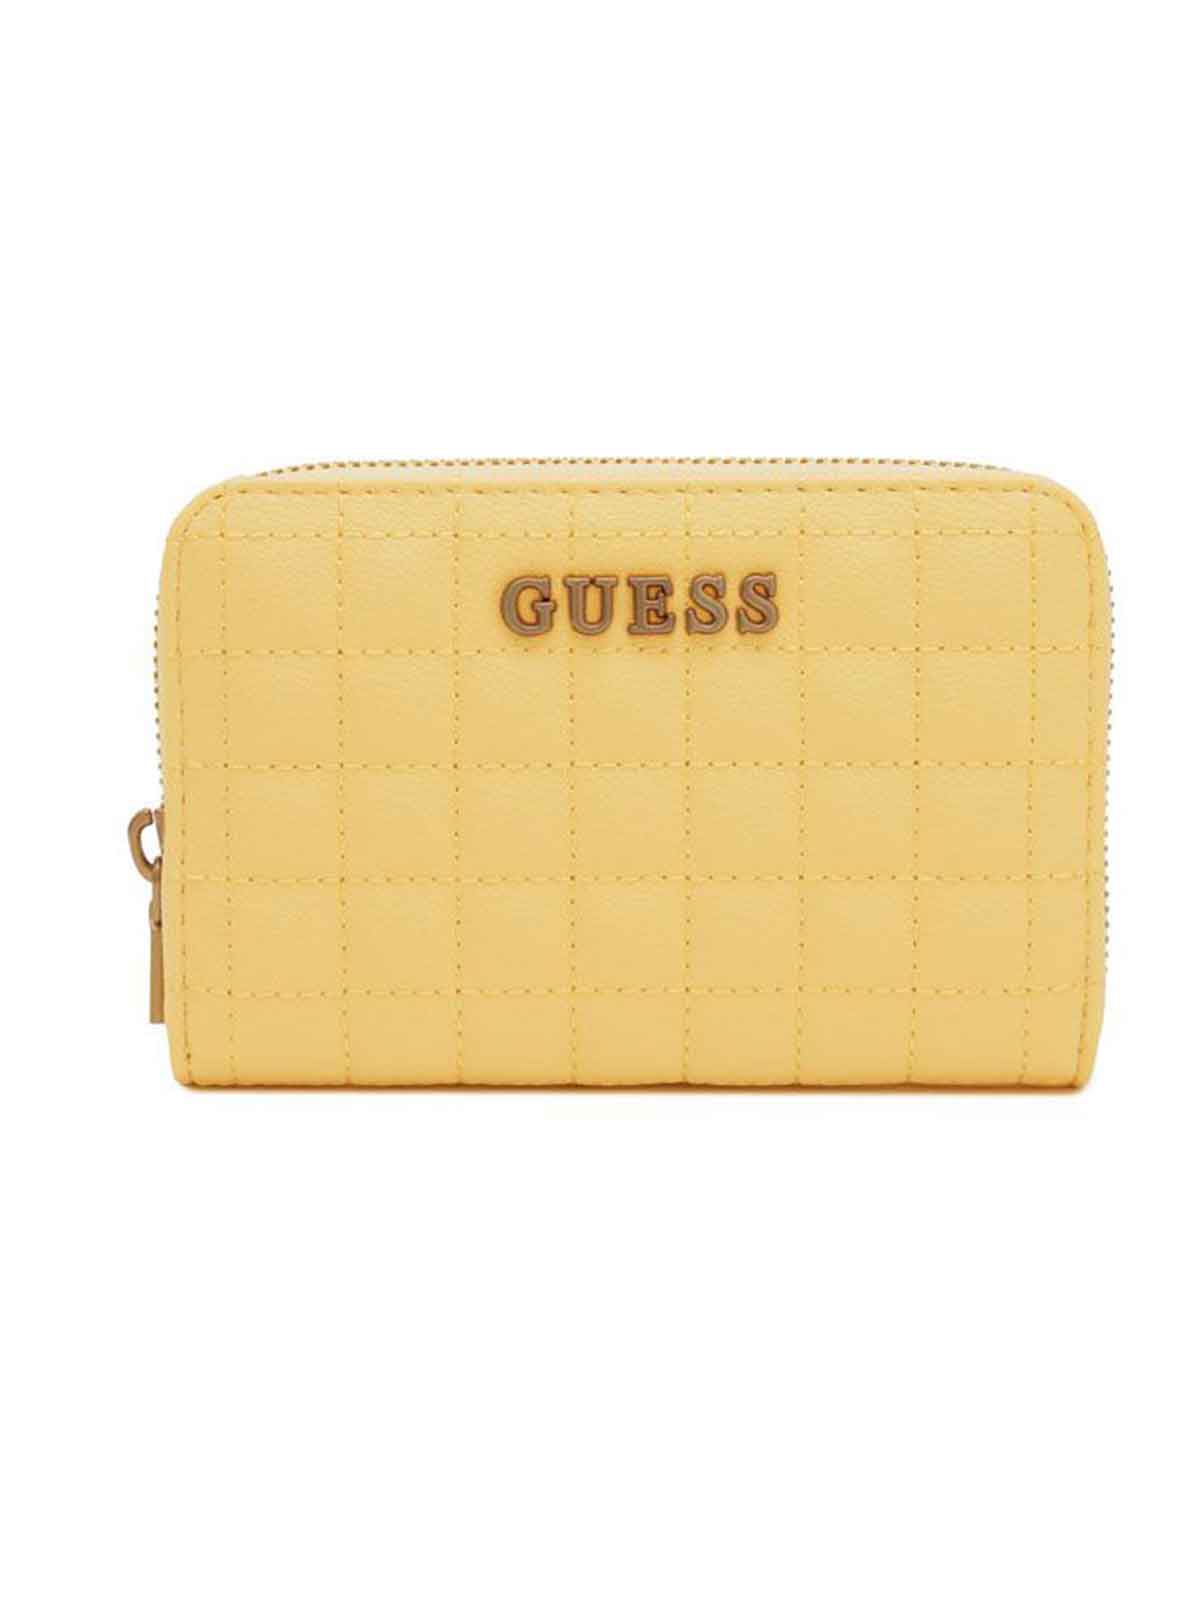   Guess | Tia Slg Med Zip Around |  